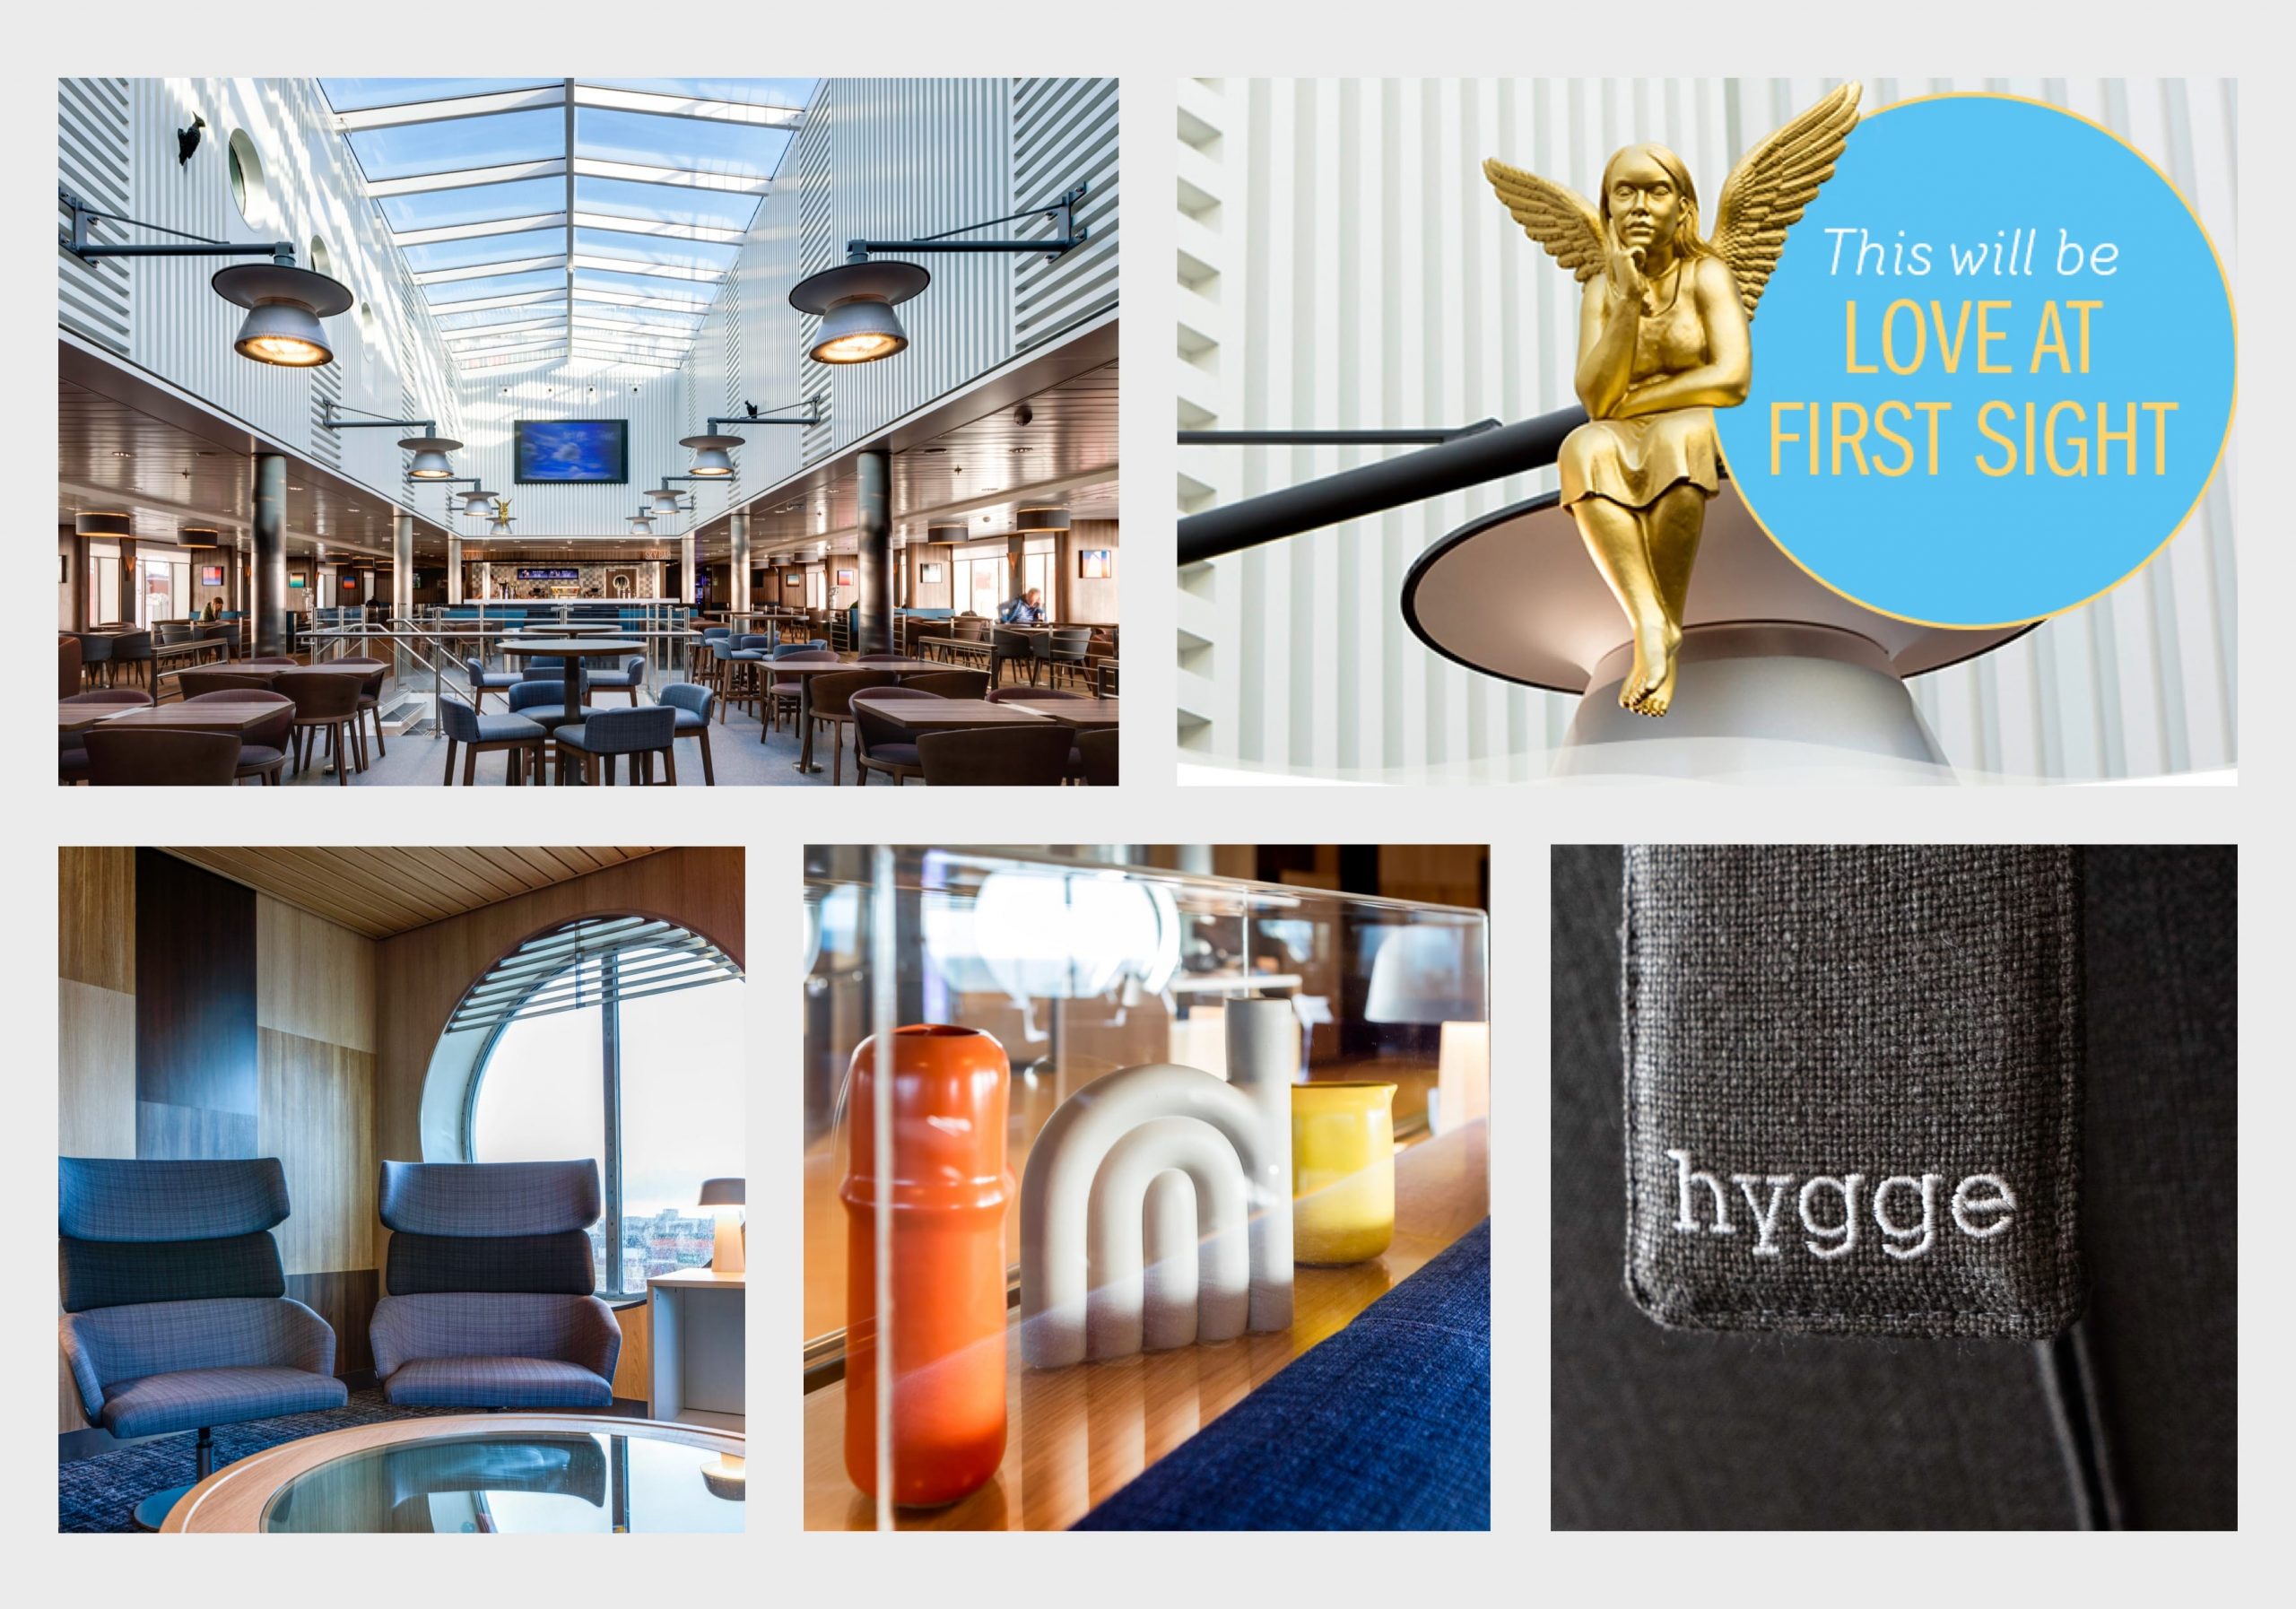 Stena Line, Stena Edda, Sky Bar and sky light, Angel 'This will be love at first sight', arm chairs, objets d'art and close up of Hygge lounge chair